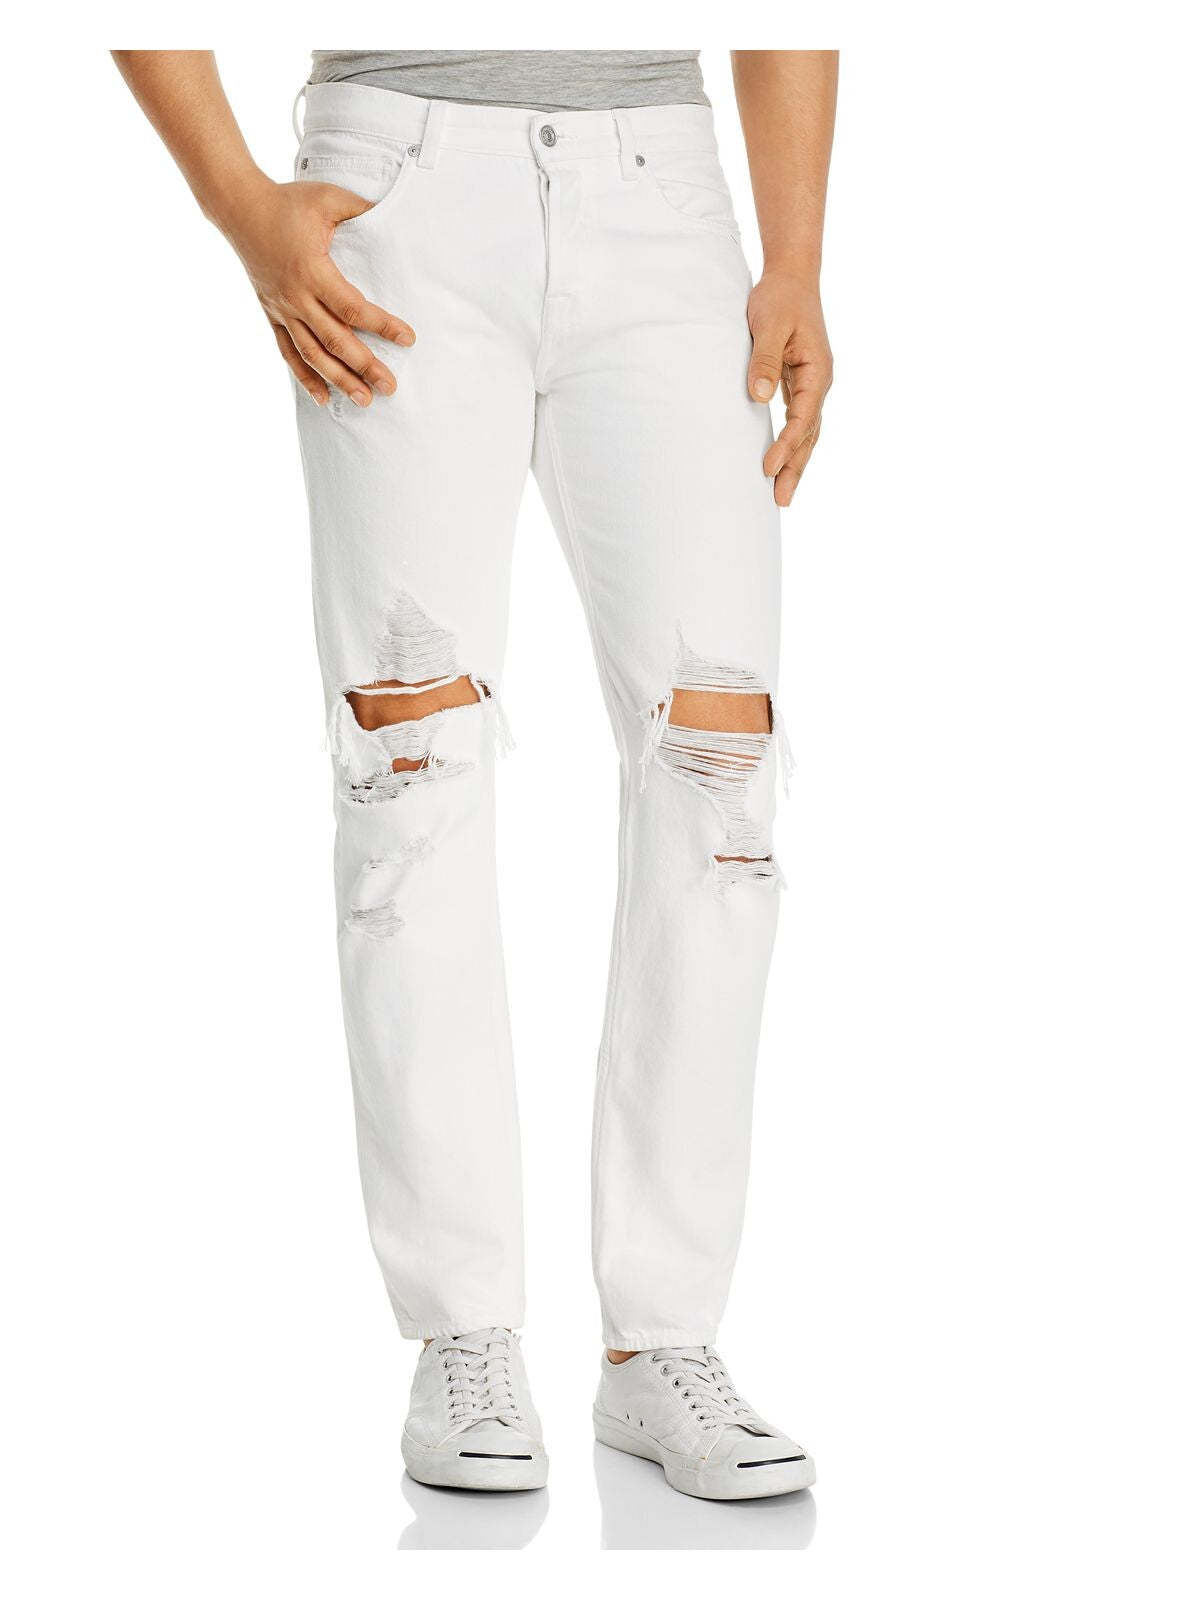 7 FOR ALL MANKIND Mens Paxtyn White Skinny Fit Denim Jeans 40 Waist